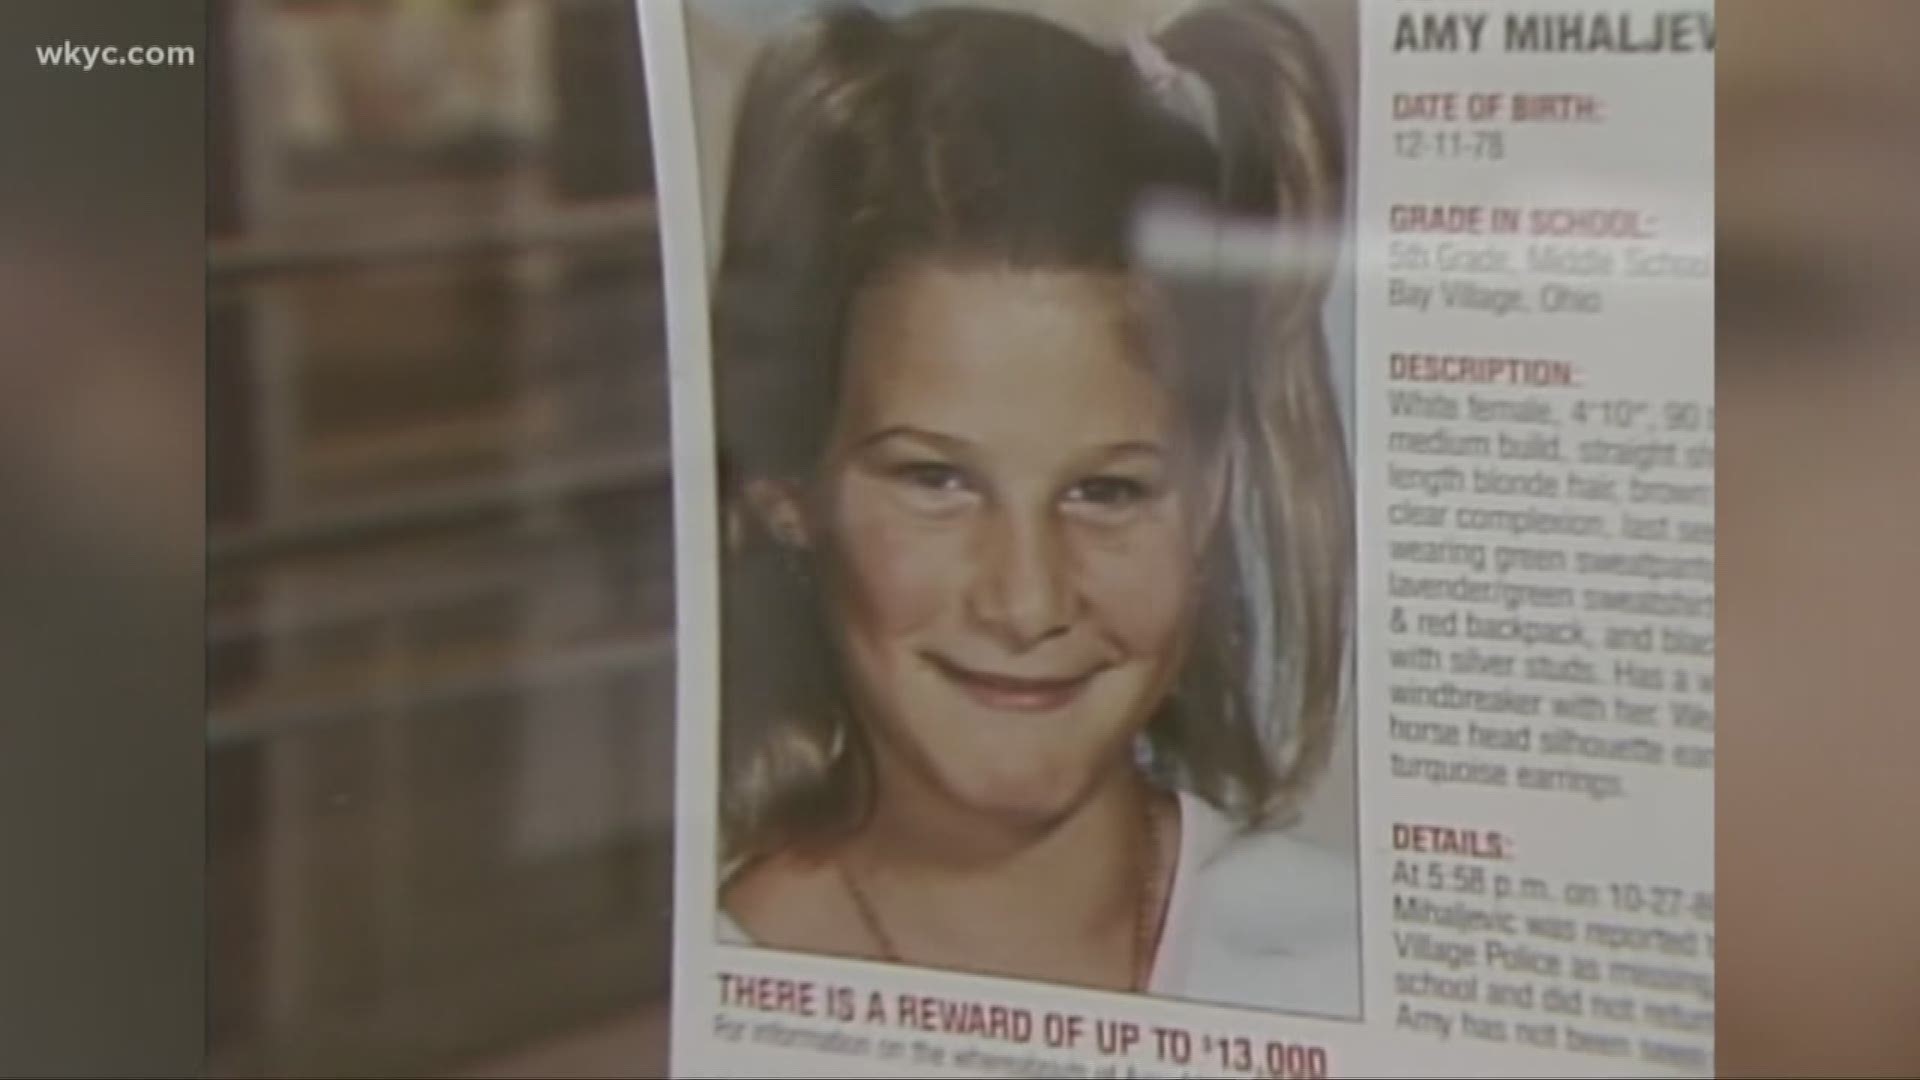 Could new technology help find Amy Mihaljevic's killer?